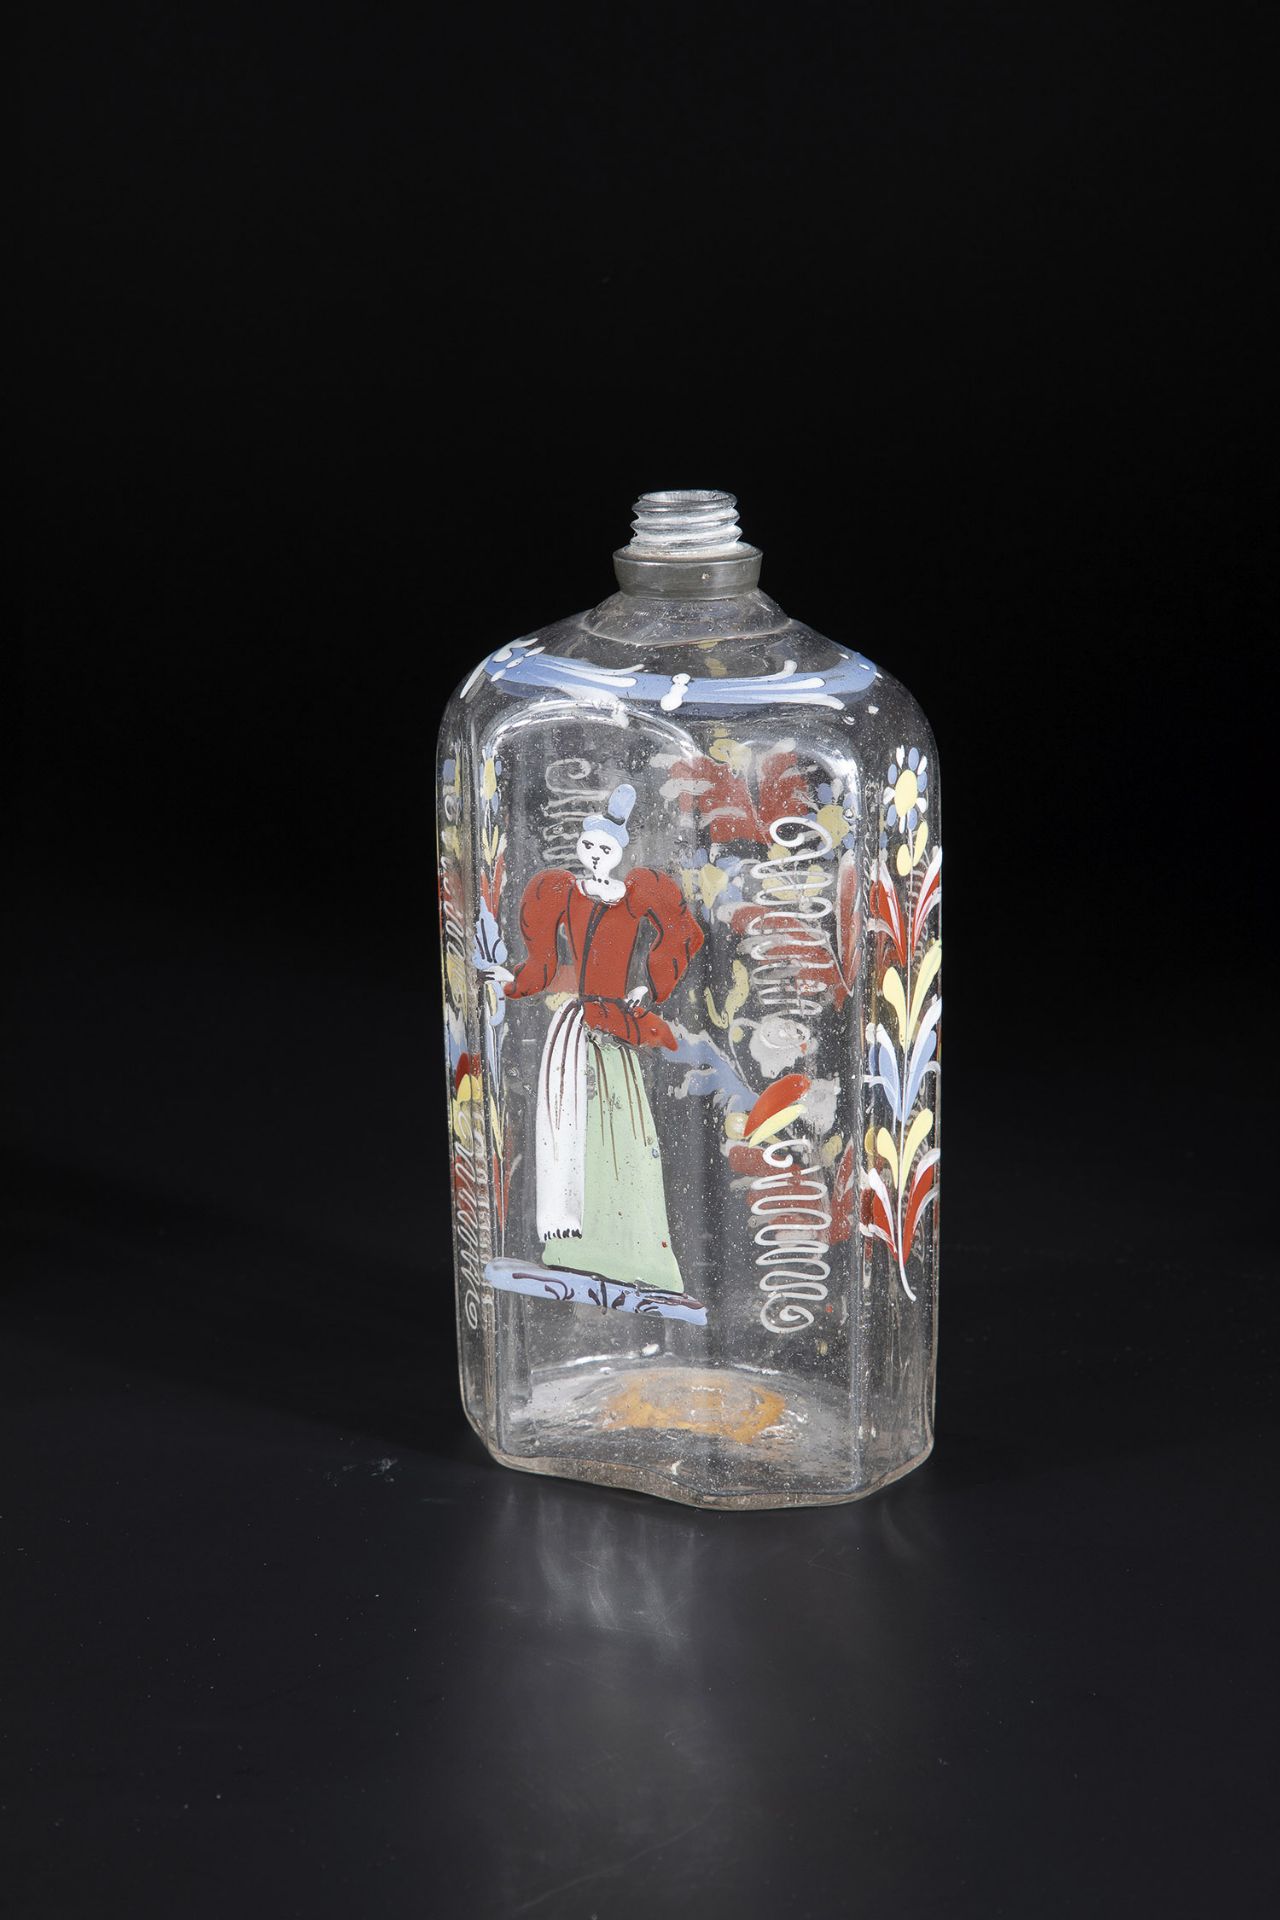 Schnapps bottle German, 18th century Colourless glass with tear. On the cross-sectional